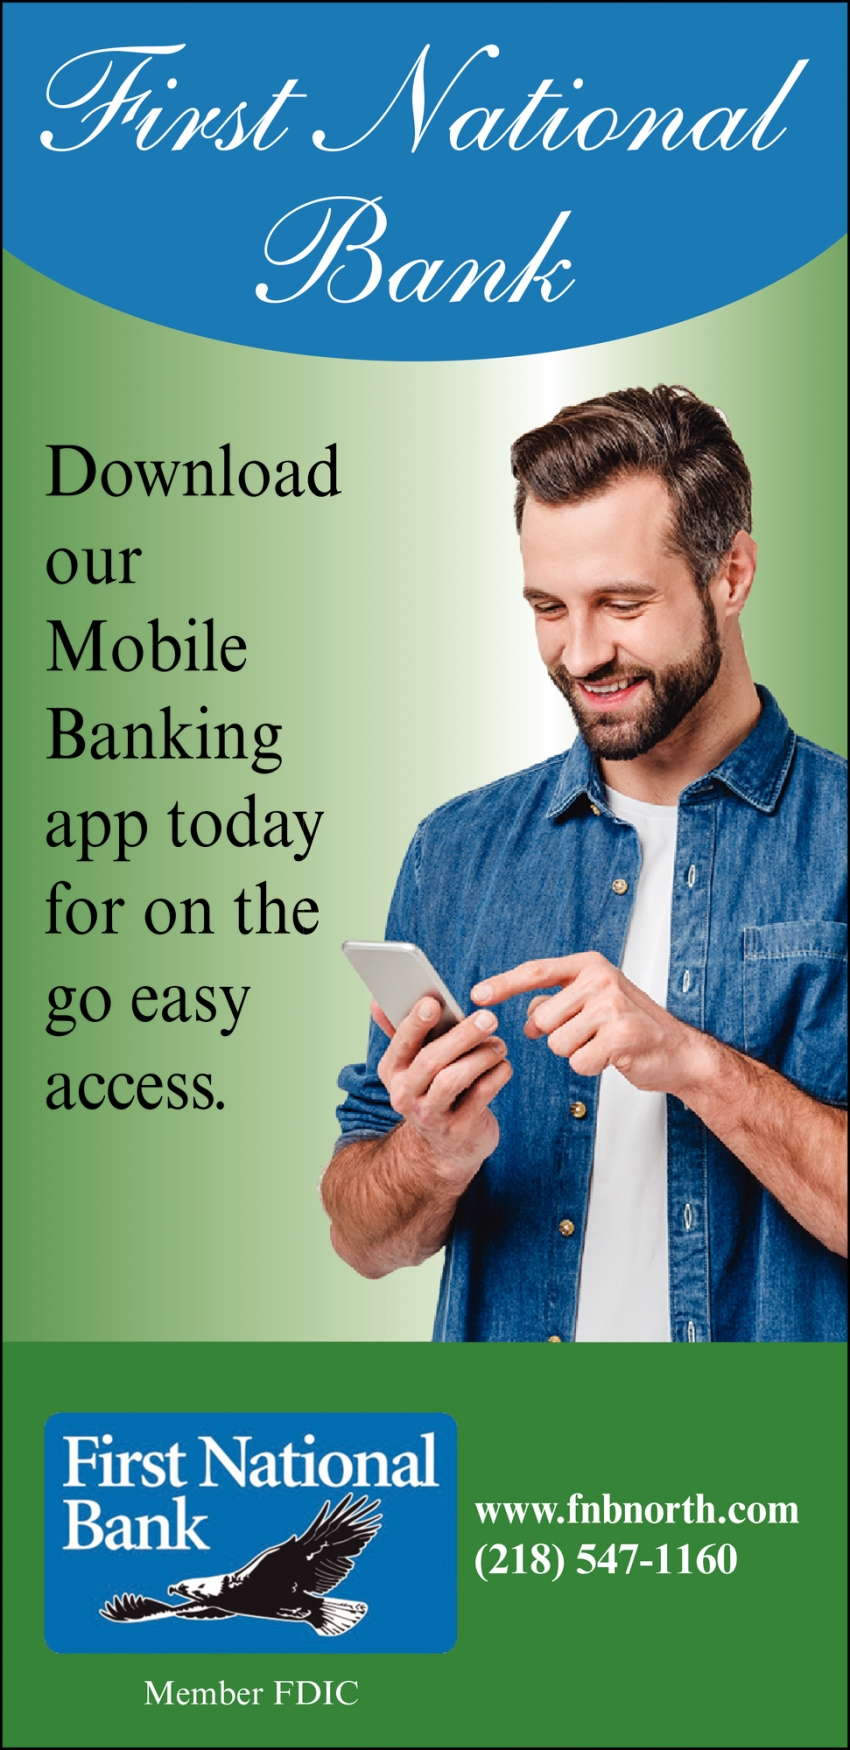 Download Our Mobile Banking App Today for On the Go Easy Access